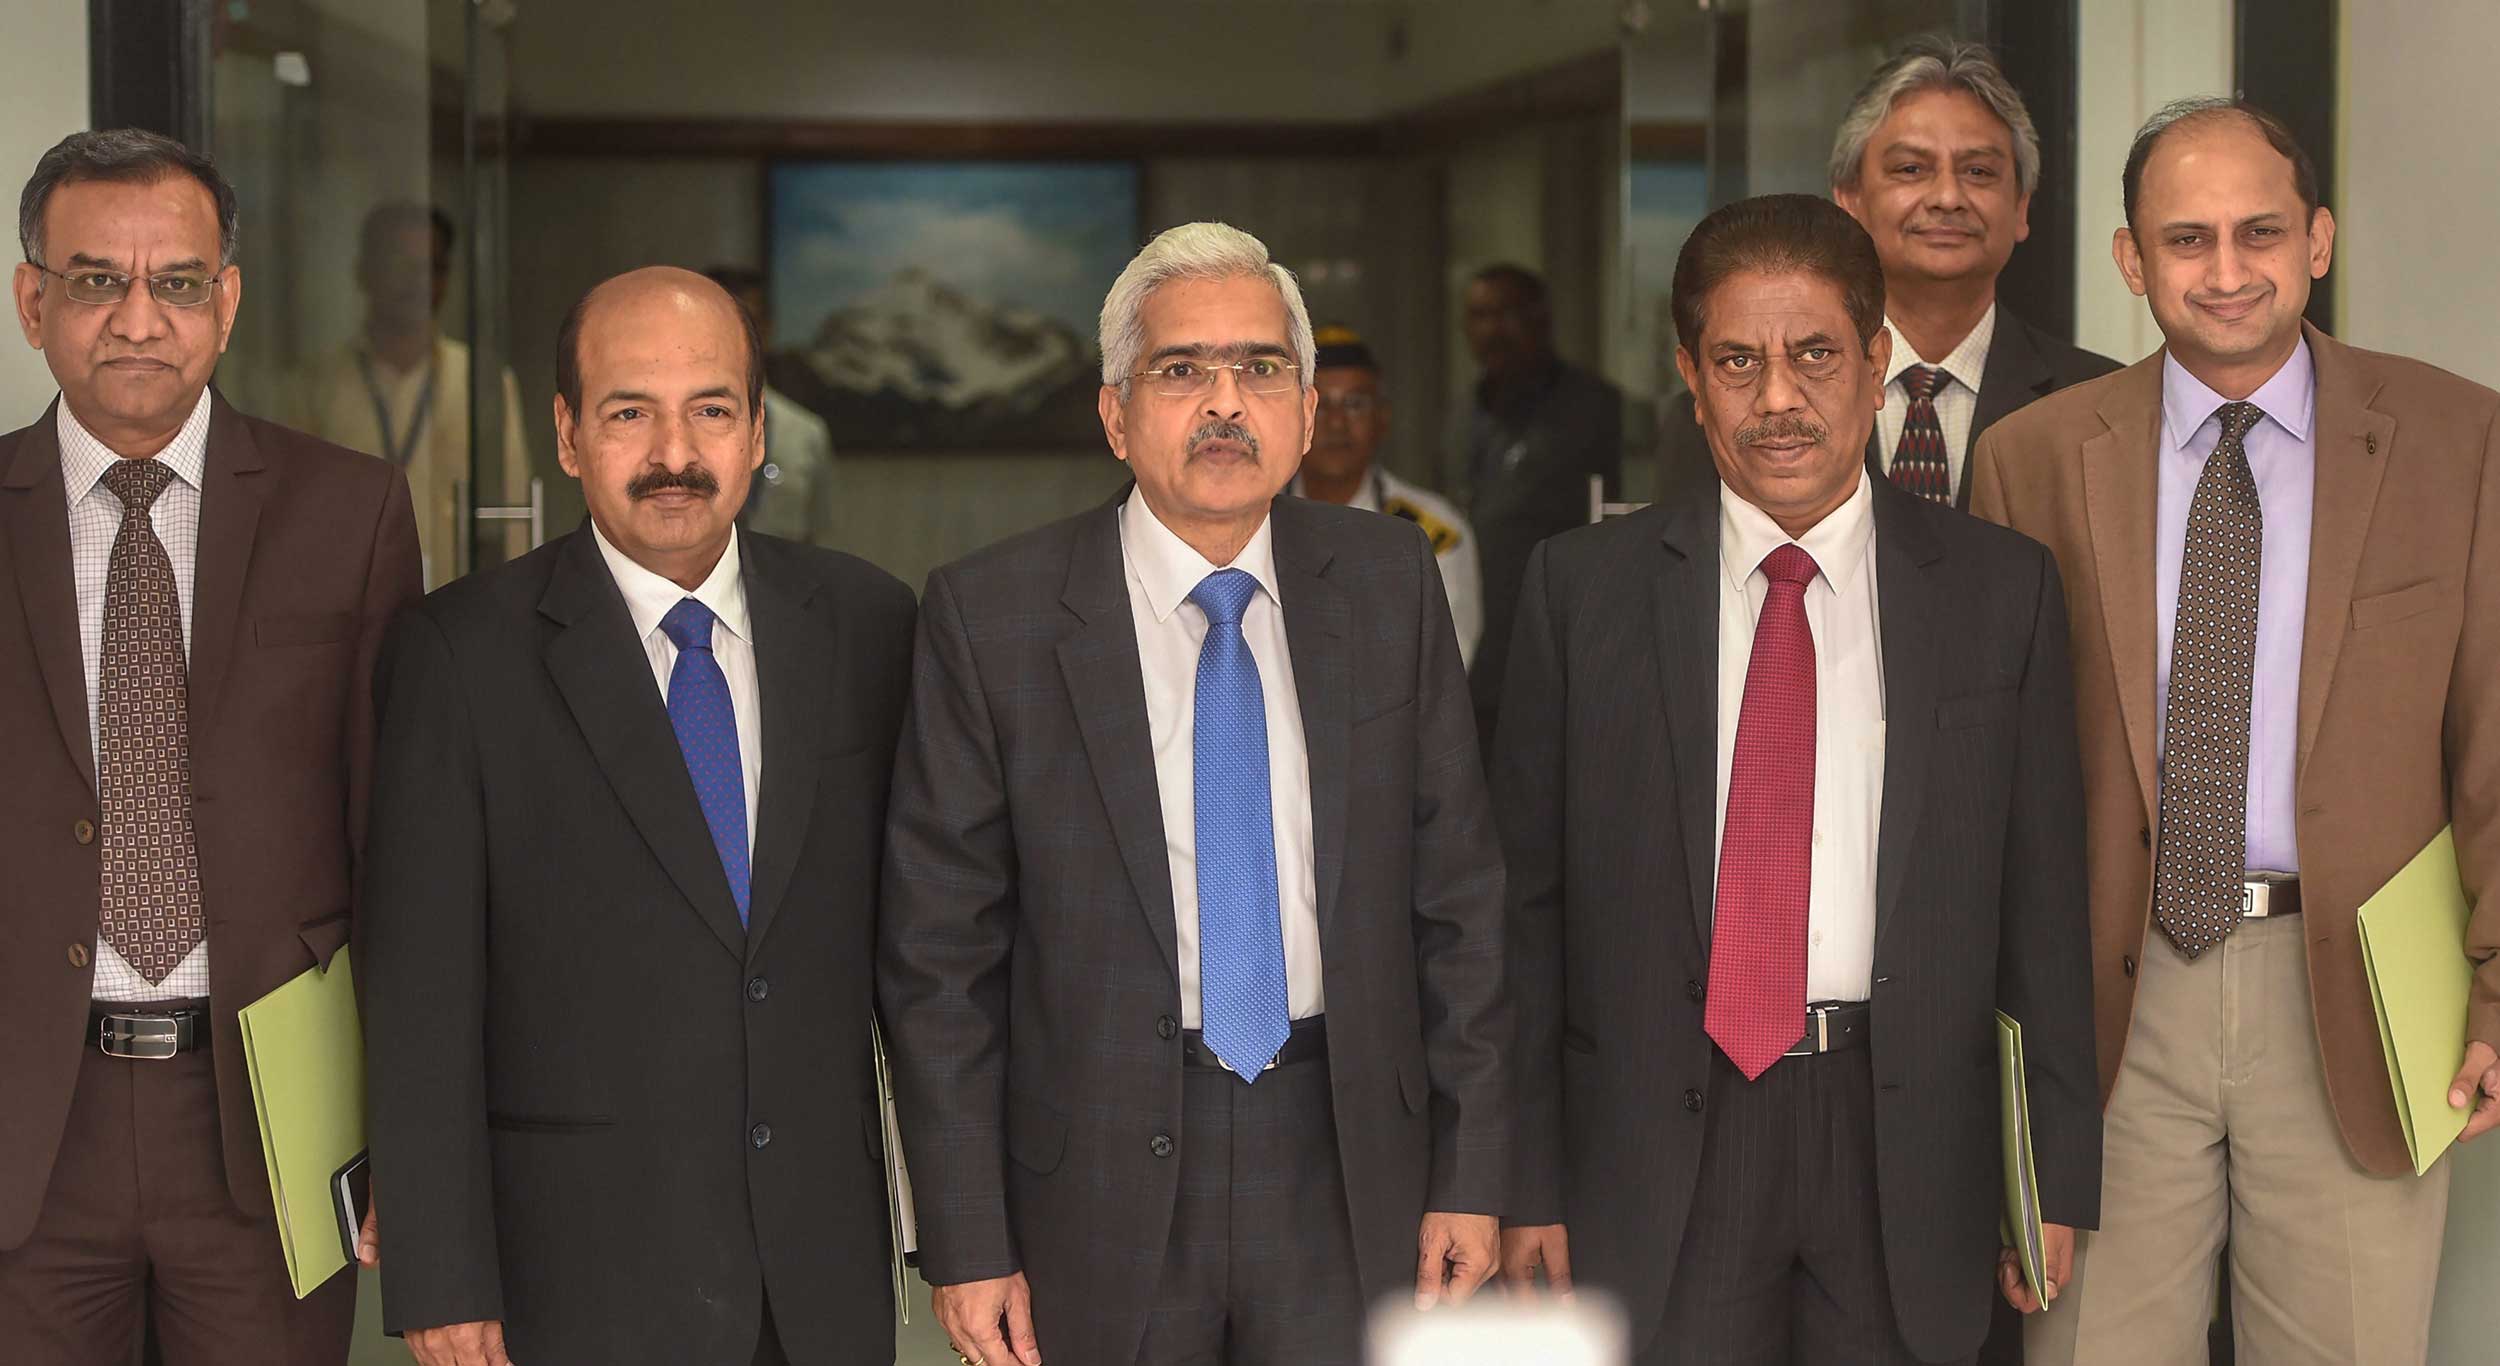 RBI governor Shaktikanta Das along with deputies arrive for RBI's bi-monthly policy review, in Mumbai, on April 4, 2019. Das said since the last meeting of the panel in April, greater clarity had emerged about the evolving macroeconomic situation.